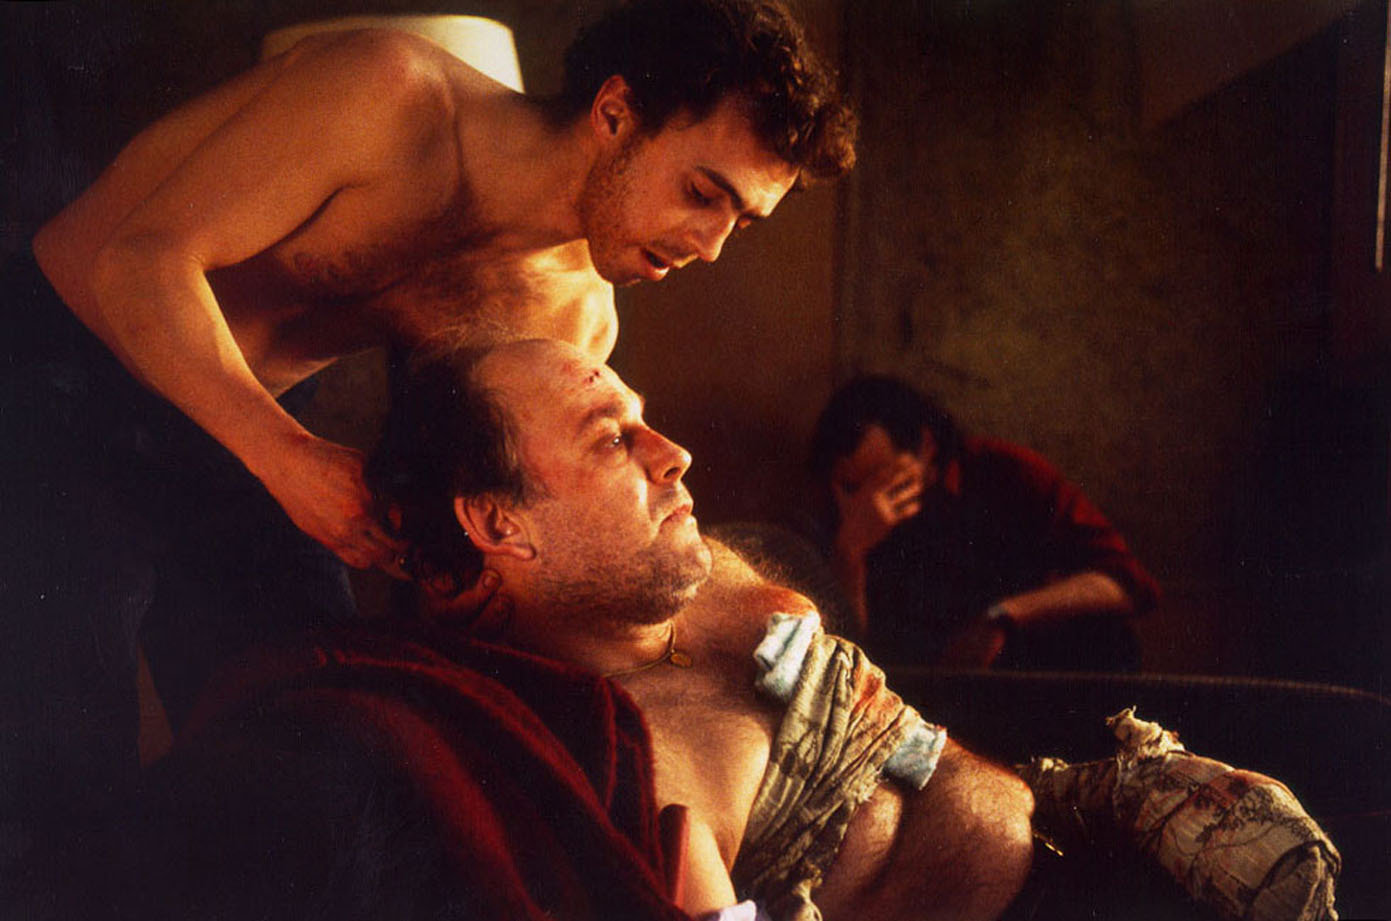 Serge Houde (center) as the doomed kidnapped victim, Pierre Laporte, in the French film 